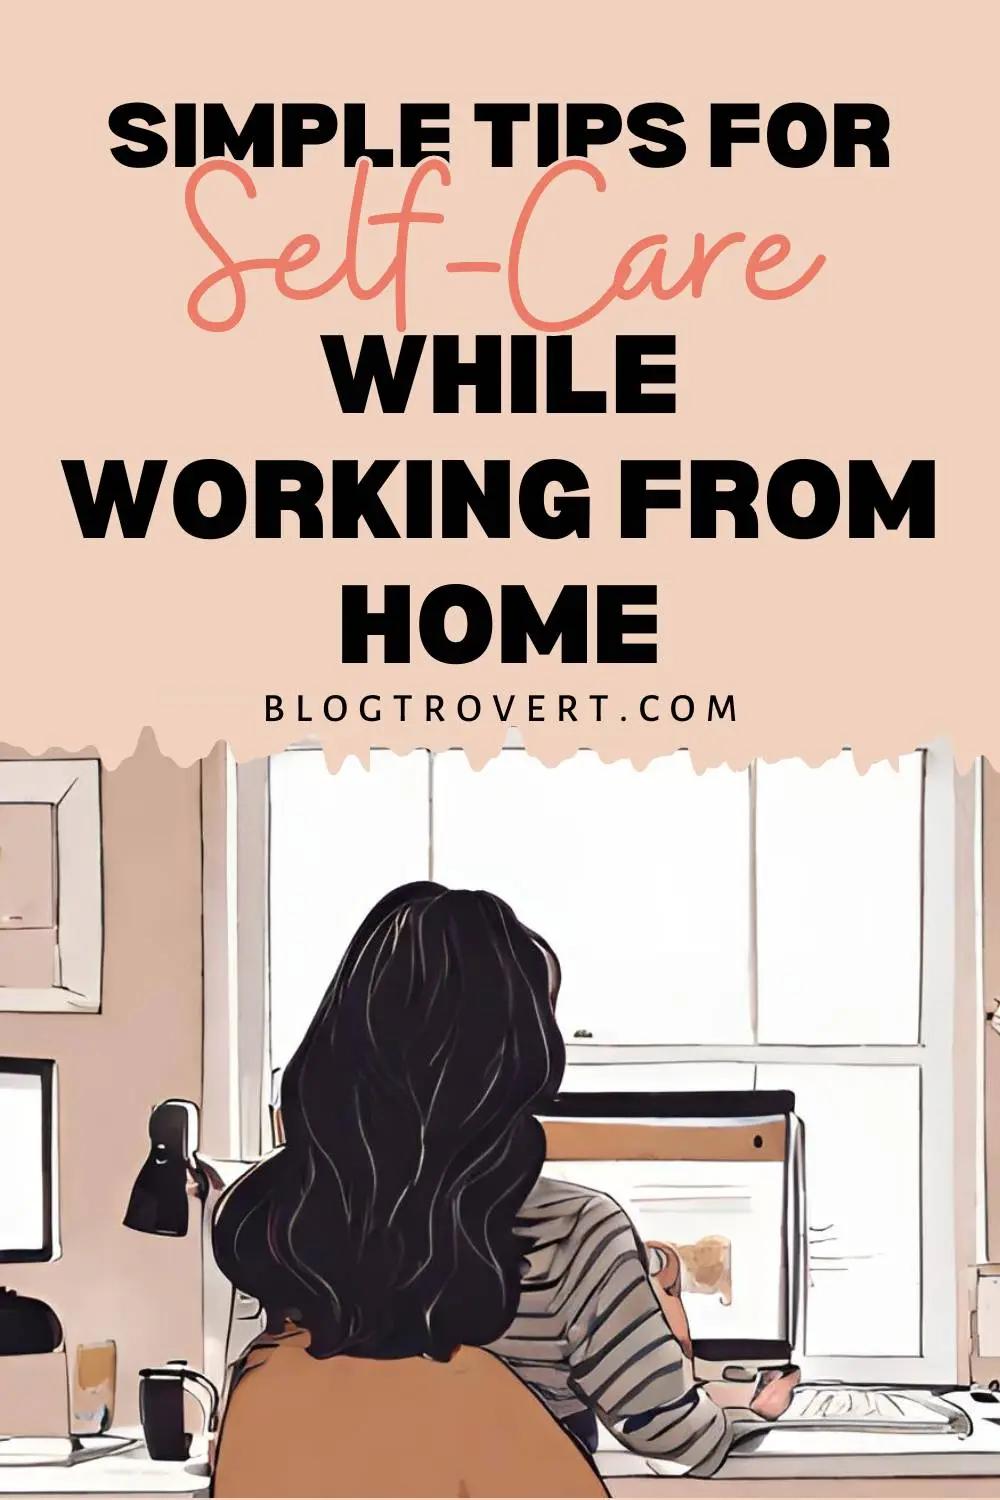 A simple guide to self-care while working from home